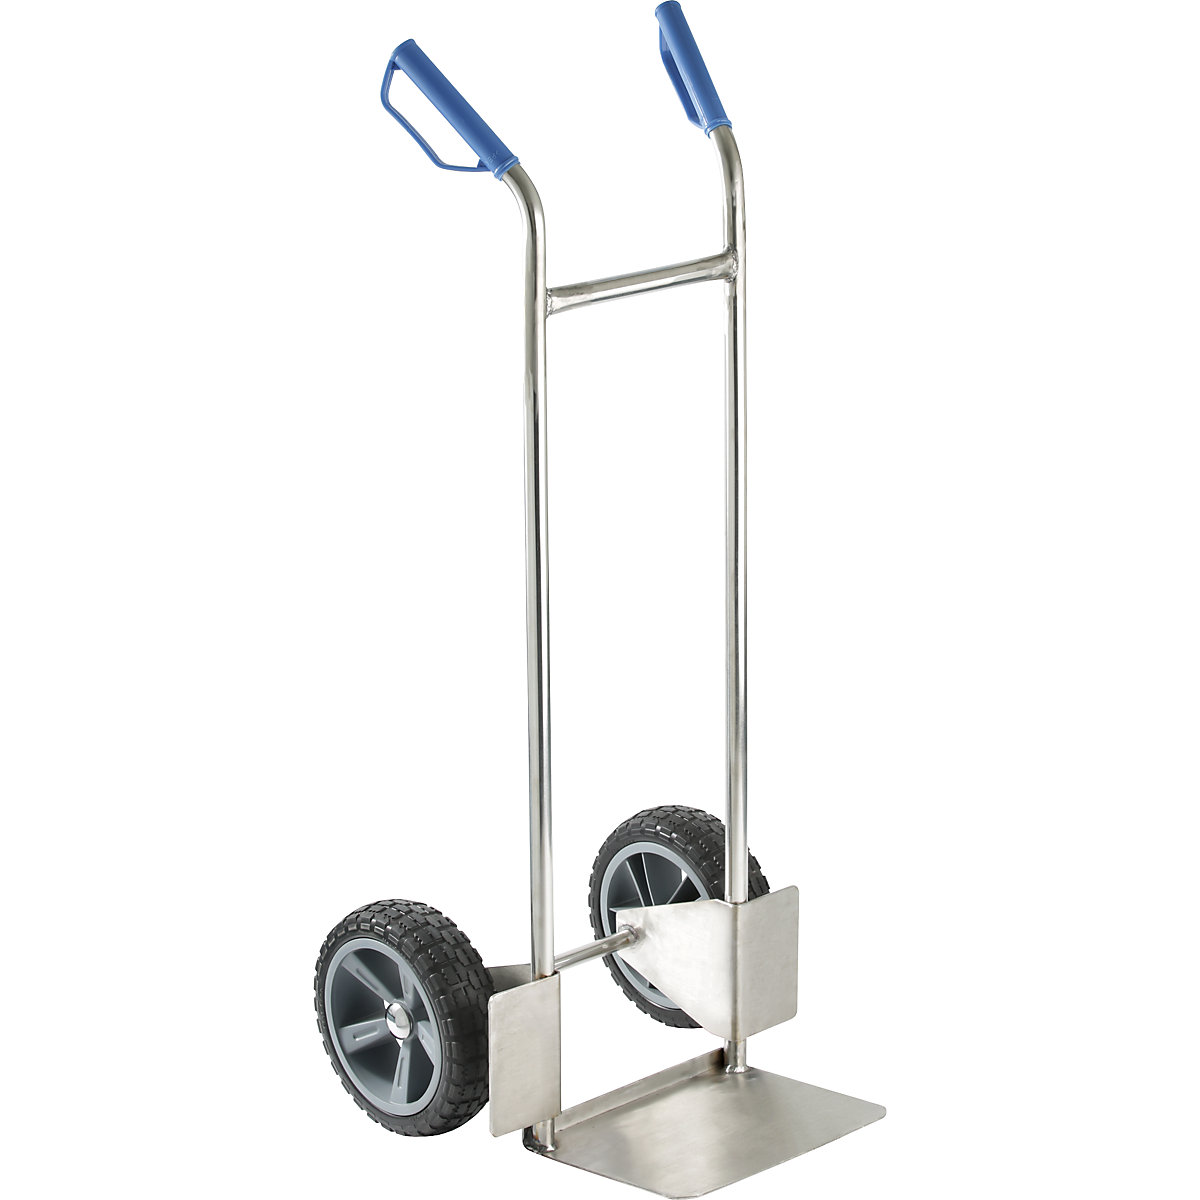 Stainless steel sack truck – eurokraft basic, with polyurethane tyres, max. load 150 kg, 5+ items-5